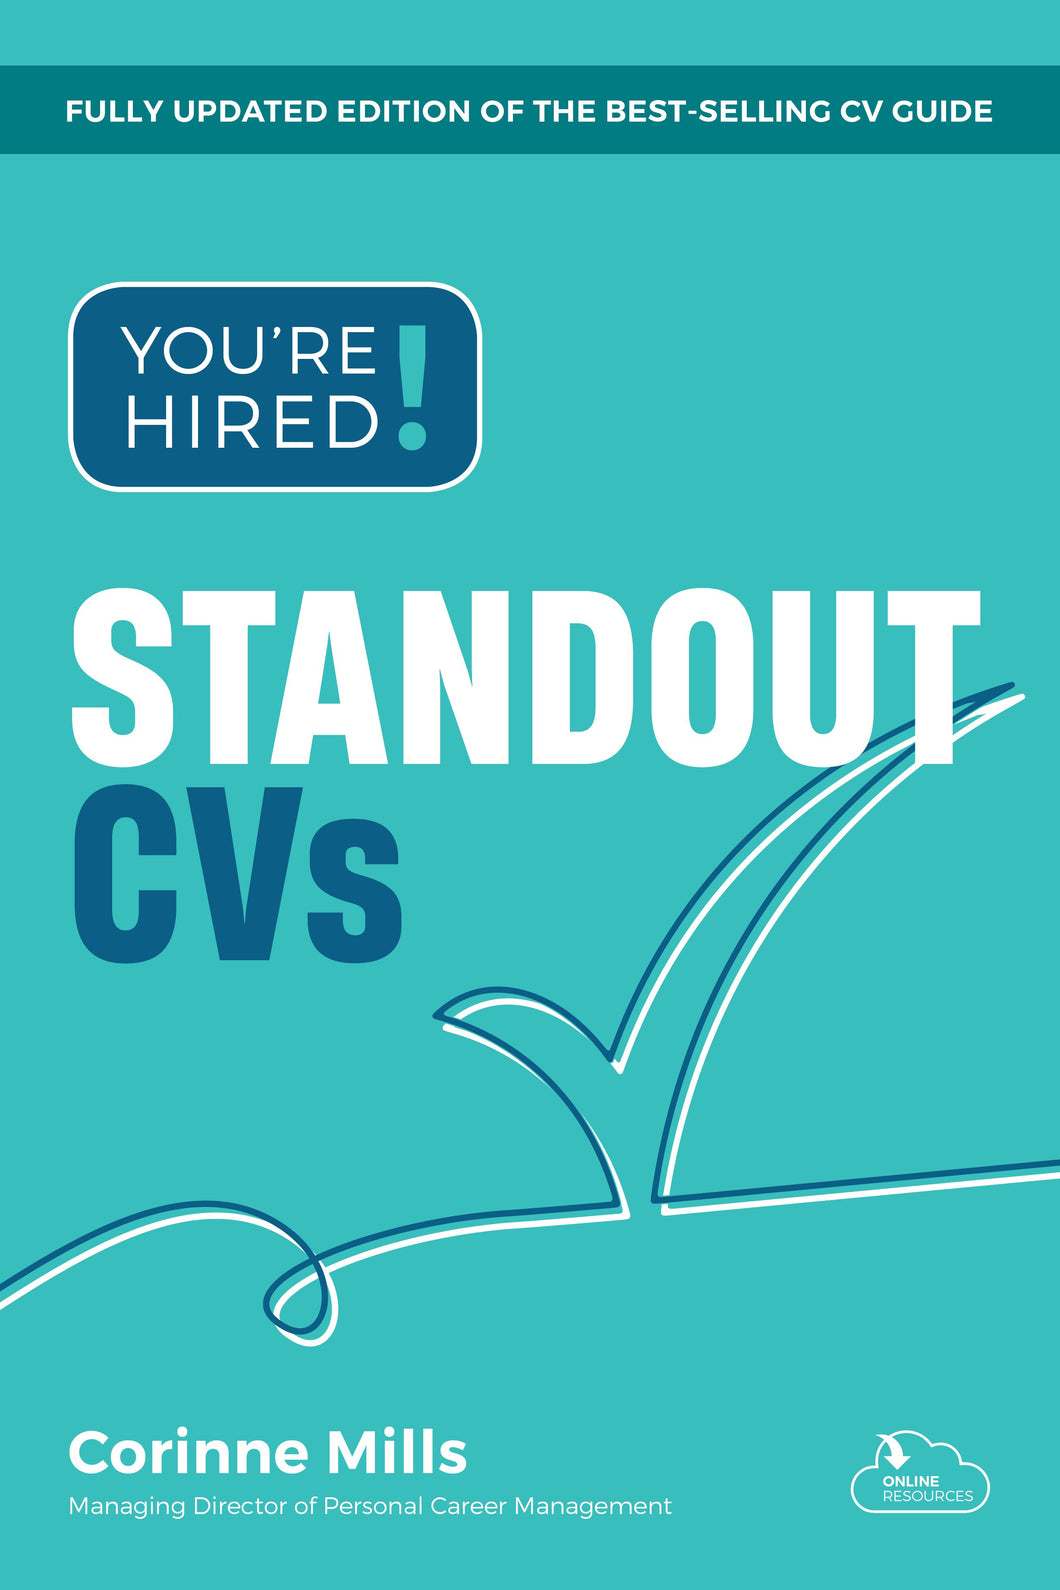 You're Hired! Standout CVs